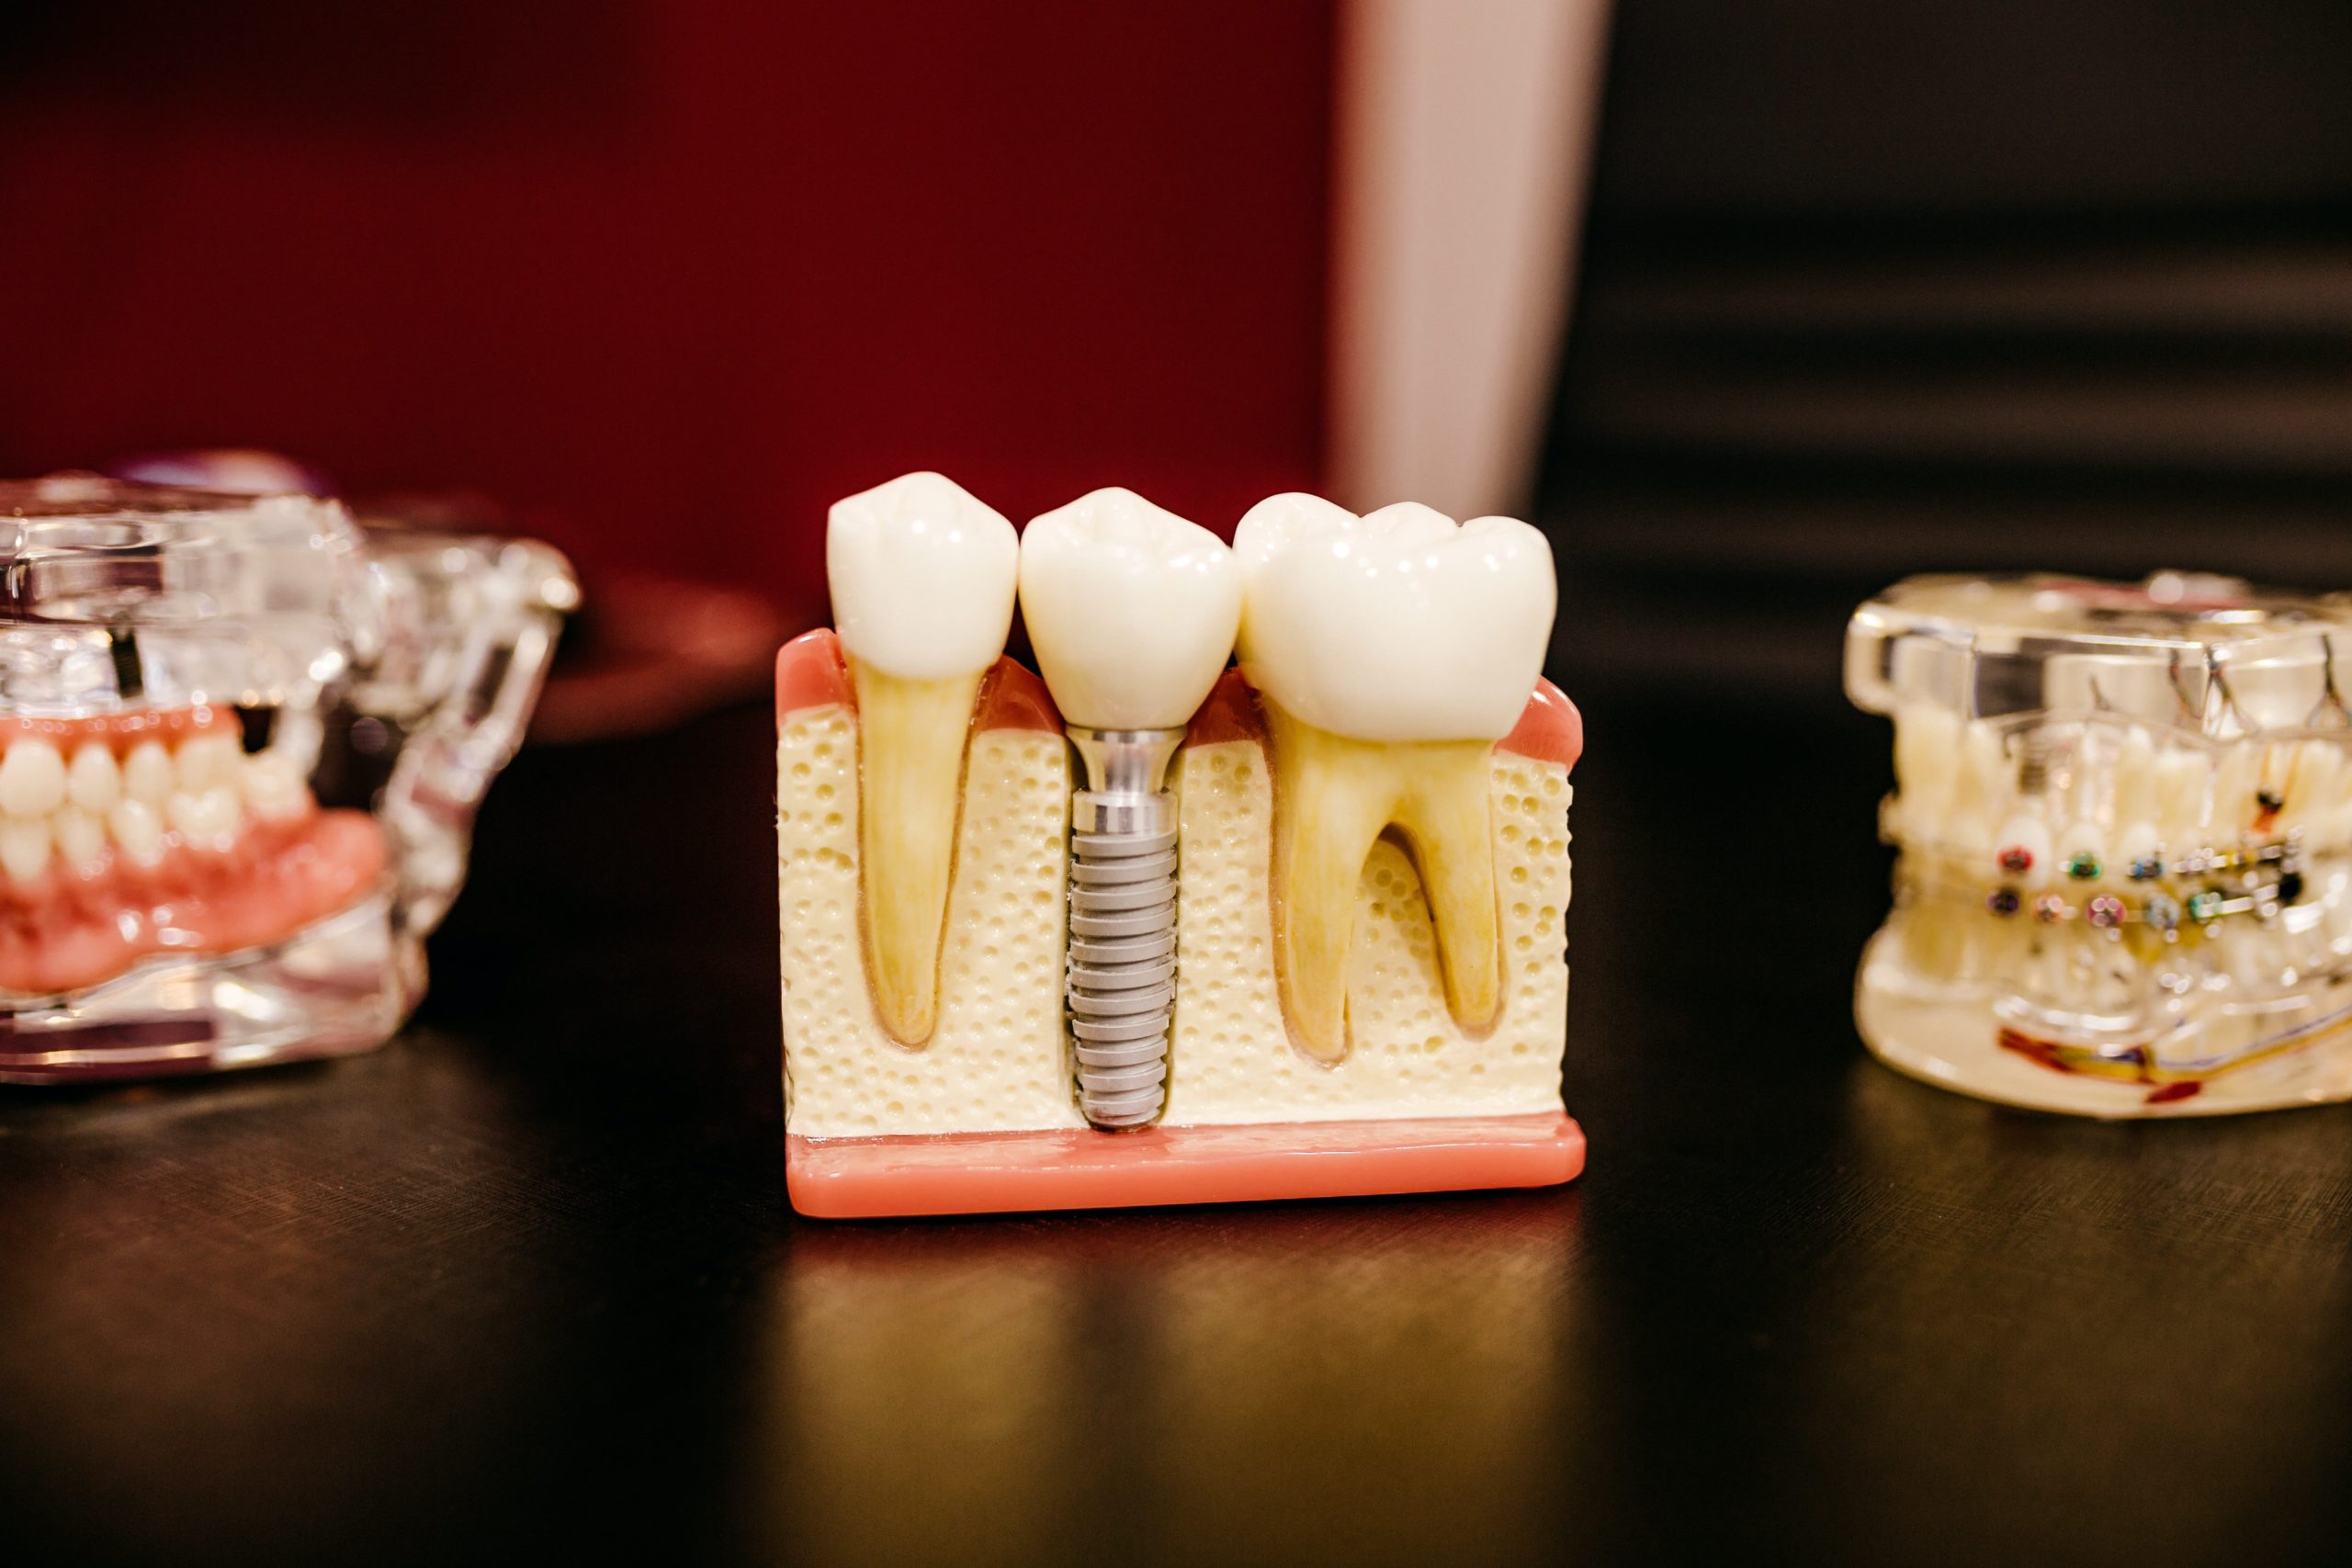 Rhone Dental Clinic Article Dental Prosthesis Image01 4 Scaled